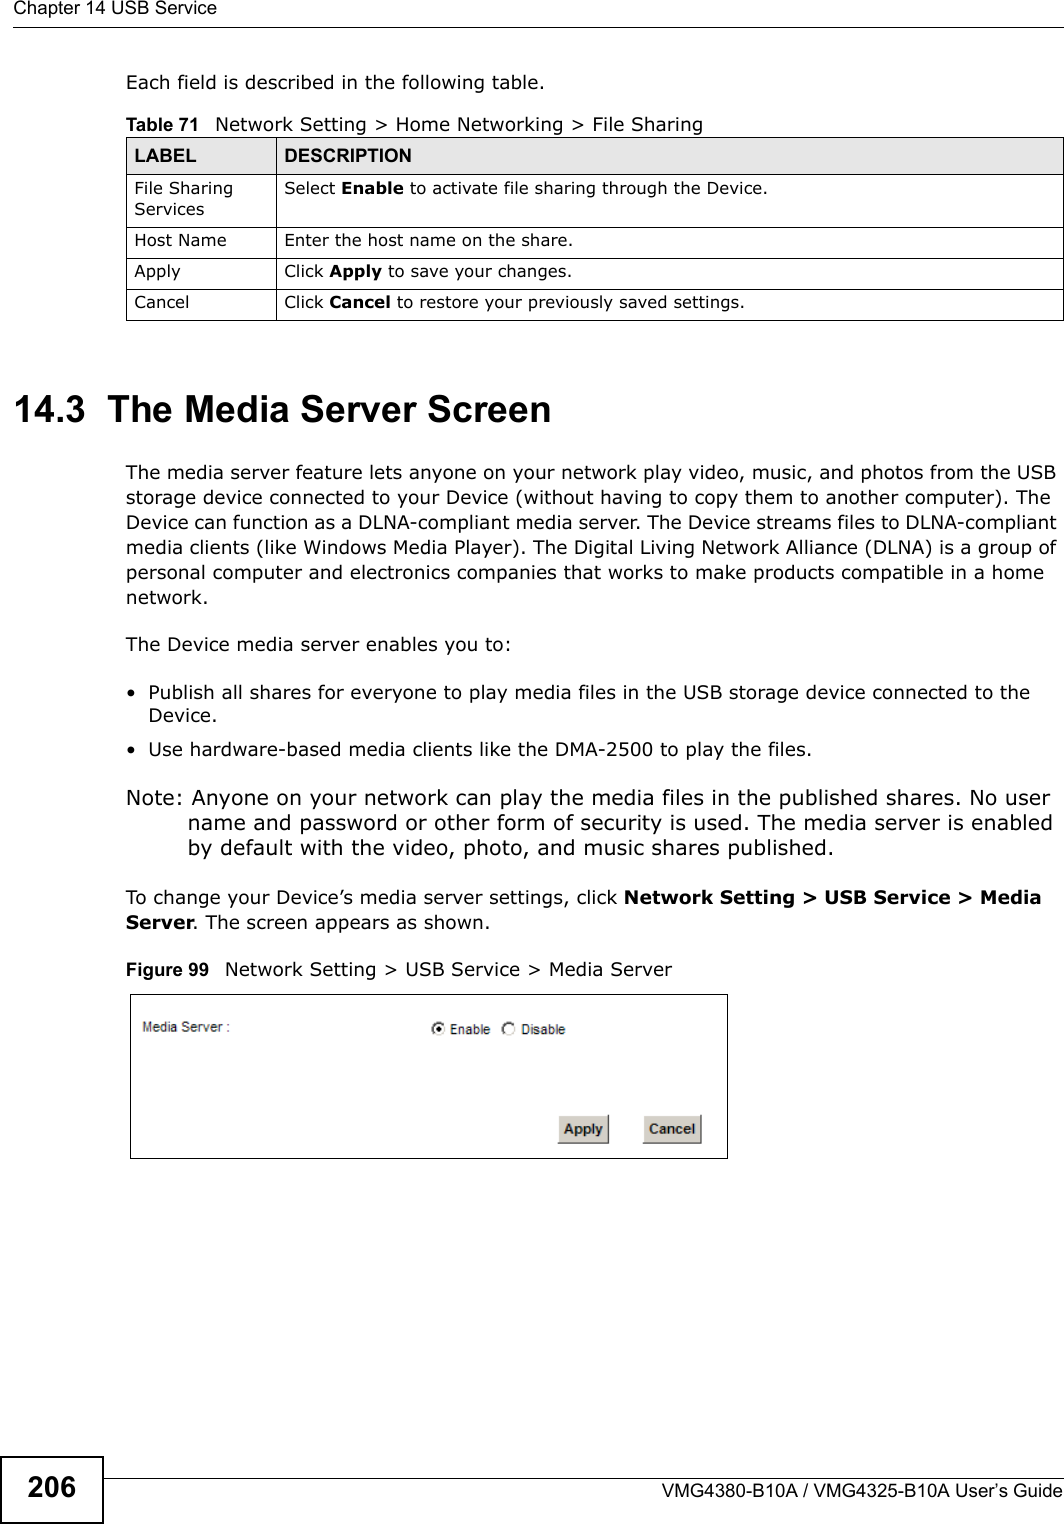 Chapter 14 USB ServiceVMG4380-B10A / VMG4325-B10A User’s Guide206Each field is described in the following table.14.3  The Media Server ScreenThe media server feature lets anyone on your network play video, music, and photos from the USB storage device connected to your Device (without having to copy them to another computer). The Device can function as a DLNA-compliant media server. The Device streams files to DLNA-compliant media clients (like Windows Media Player). The Digital Living Network Alliance (DLNA) is a group ofpersonal computer and electronics companies that works to make products compatible in a home network.The Device media server enables you to:• Publish all shares for everyone to play media files in the USB storage device connected to the Device.• Use hardware-based media clients like the DMA-2500 to play the files. Note: Anyone on your network can play the media files in the published shares. No user name and password or other form of security is used. The media server is enabled by default with the video, photo, and music shares published.To change your Device’s media server settings, click Network Setting &gt; USB Service &gt; Media Server. The screen appears as shown.Figure 99 Network Setting &gt; USB Service &gt; Media ServerTable 71   Network Setting &gt; Home Networking &gt; File SharingLABEL DESCRIPTIONFile Sharing ServicesSelect Enable to activate file sharing through the Device. Host Name Enter the host name on the share.Apply Click Apply to save your changes.Cancel Click Cancel to restore your previously saved settings.